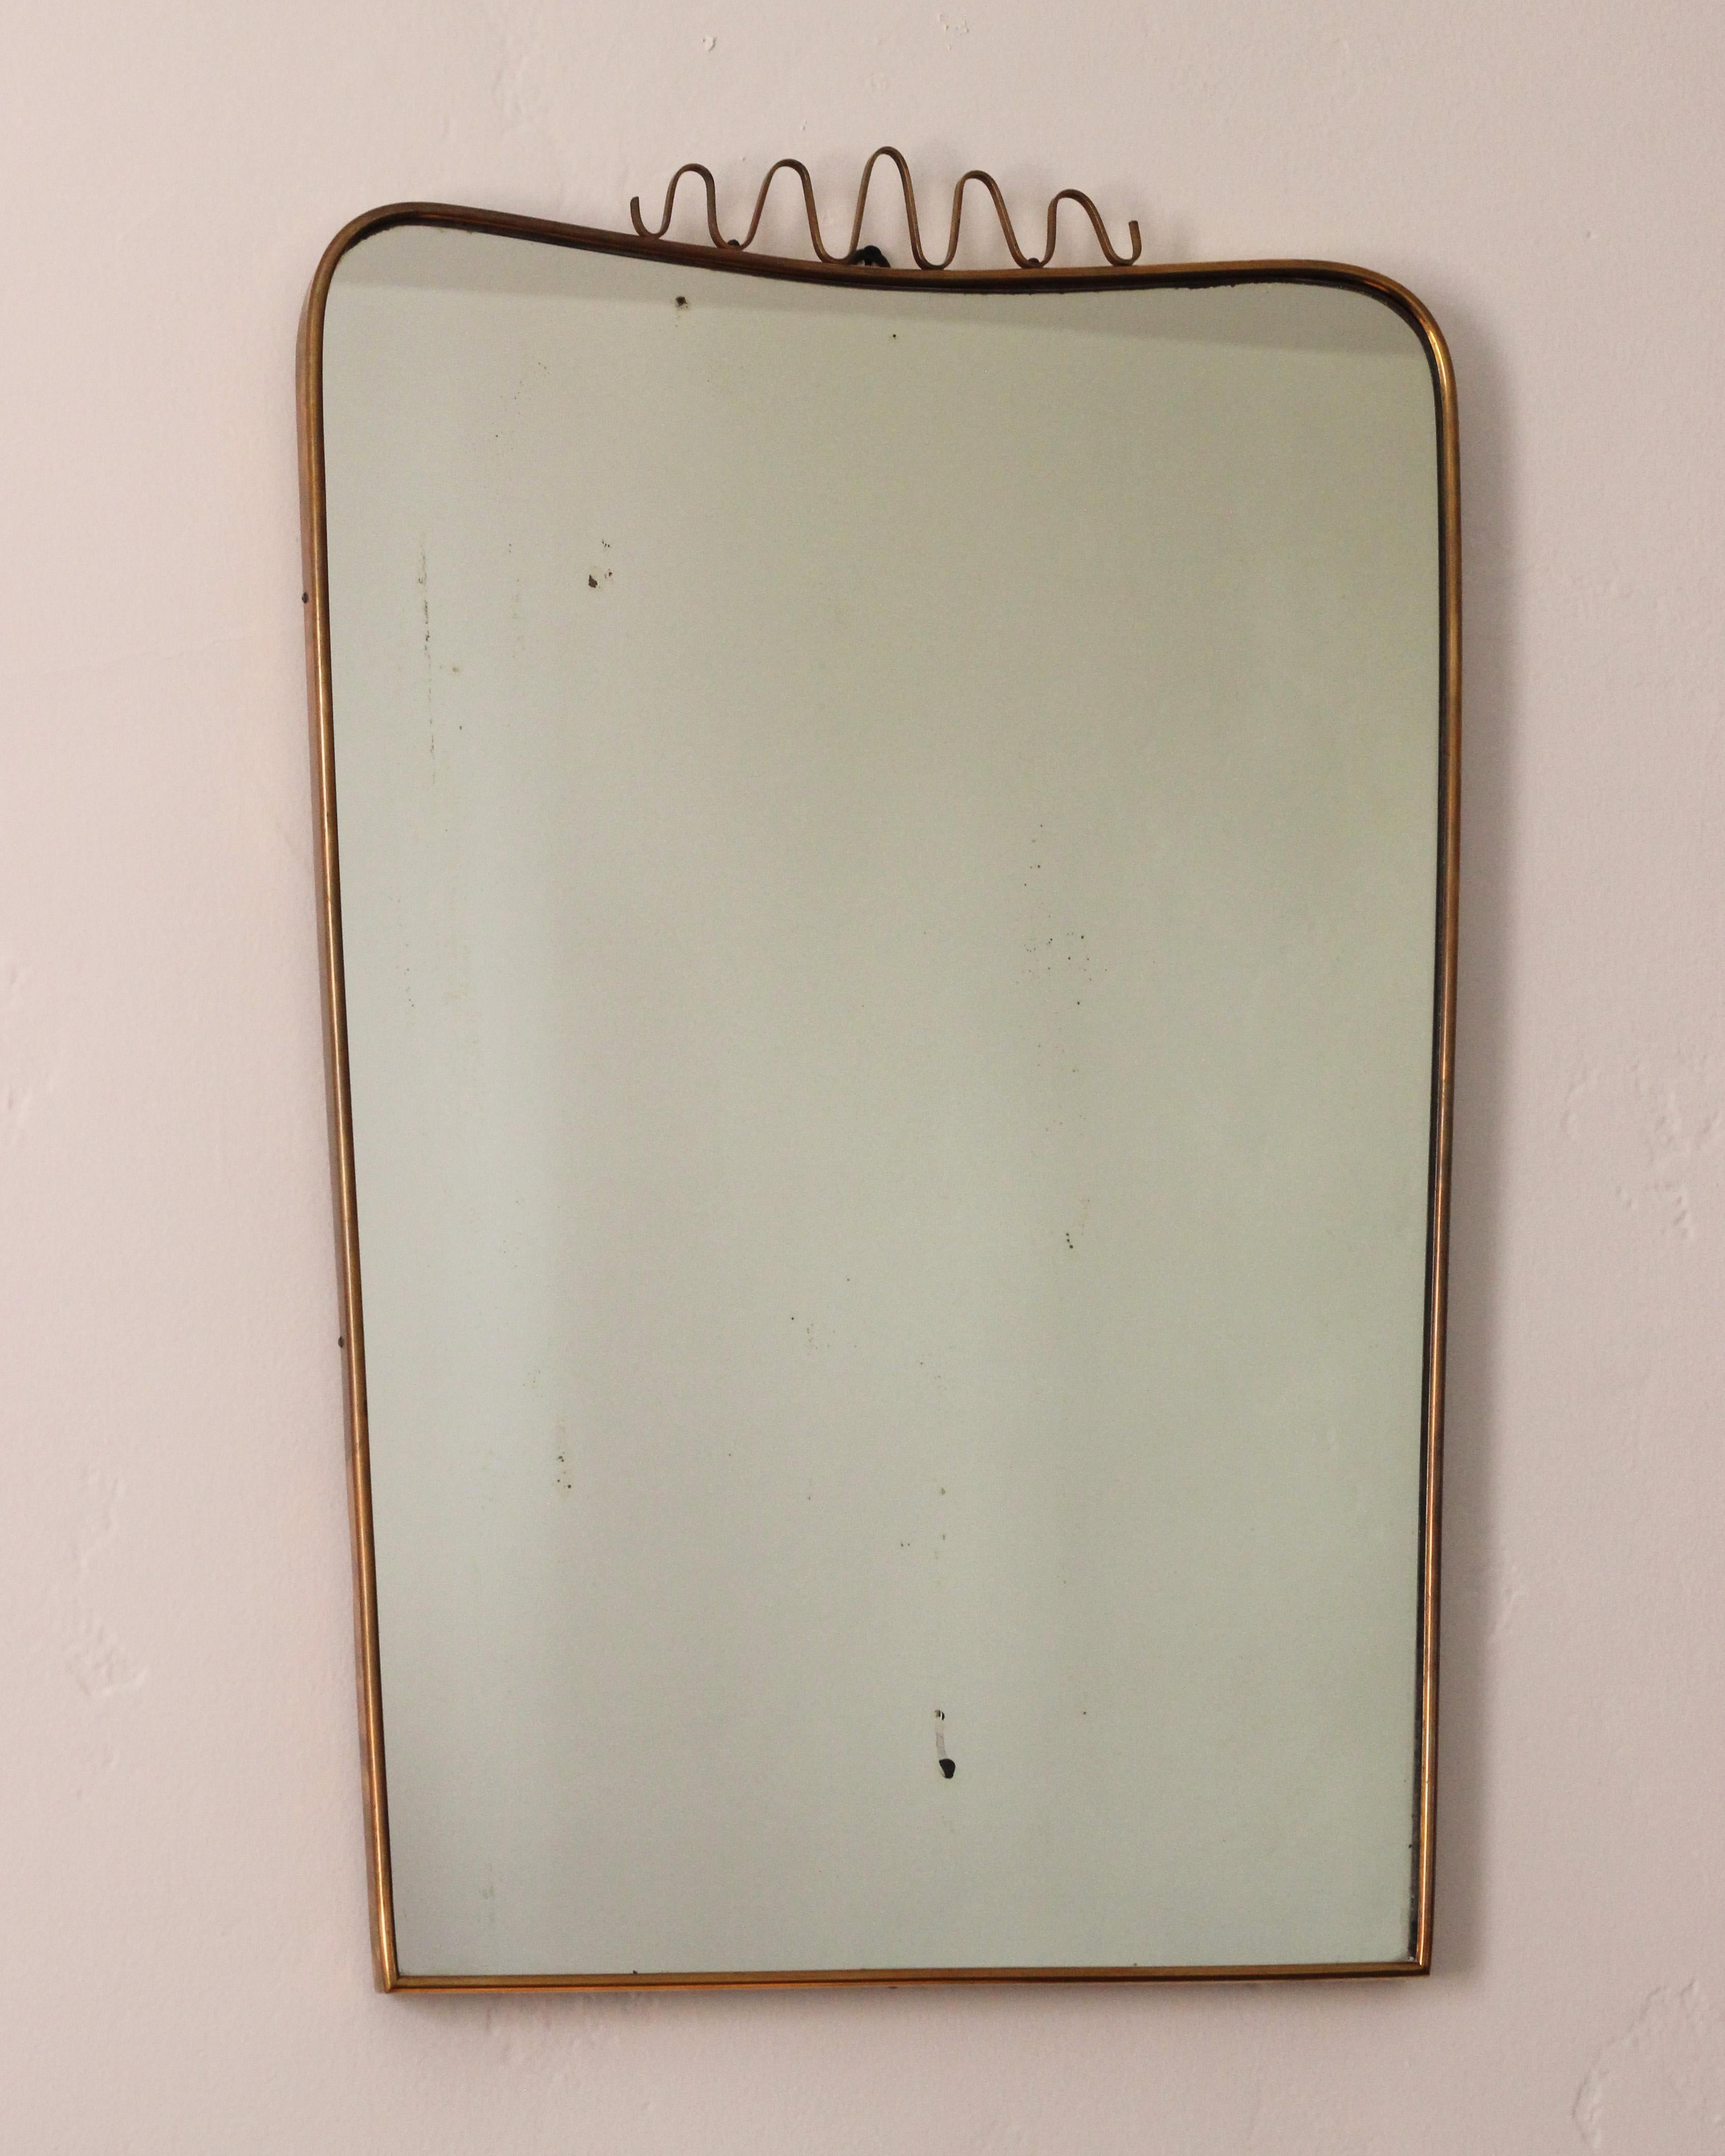 Italian wall mirror, produced in Italy, 1960s. Organically cut mirror glass is framed brass and shows patina. 

Other designers of the period include Gio Ponti, Fontana Arte, Max Ingrand, Franco Albini, and Josef Frank.